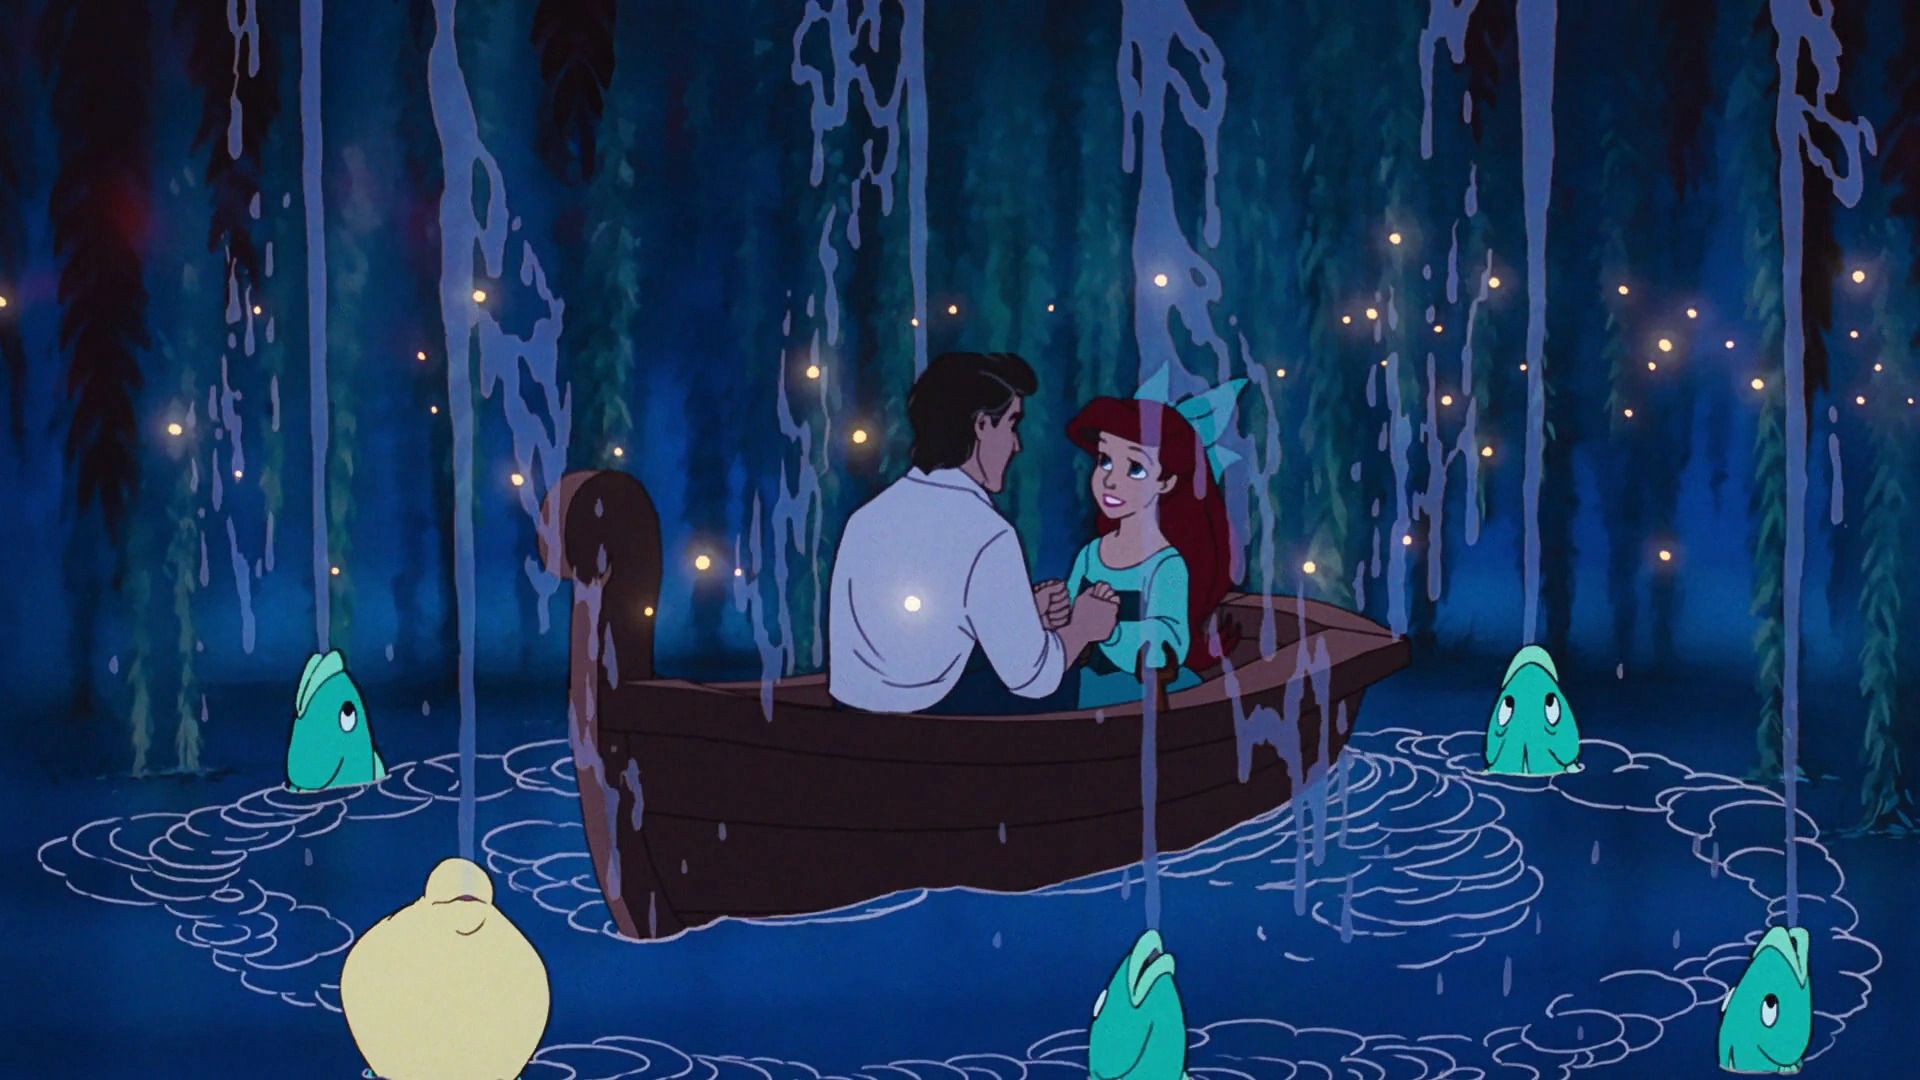 Eric & Ariel Boat Ride During Kiss The Girl In The Little Mermaid.jpg